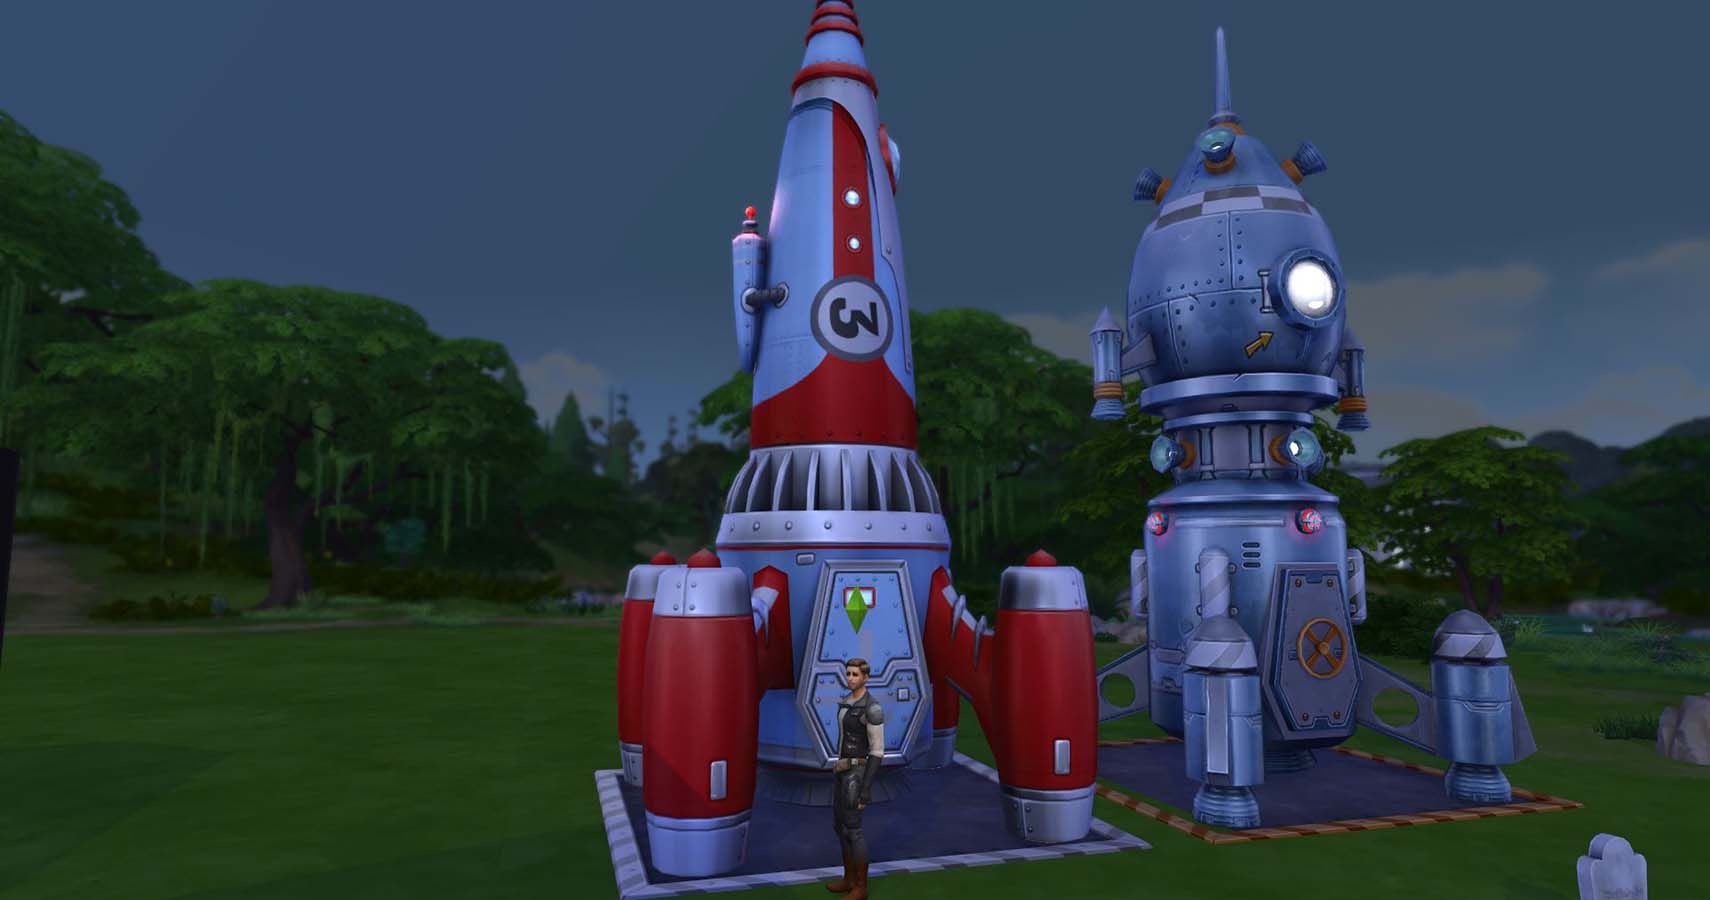 two sims 4 rocket ships side by side